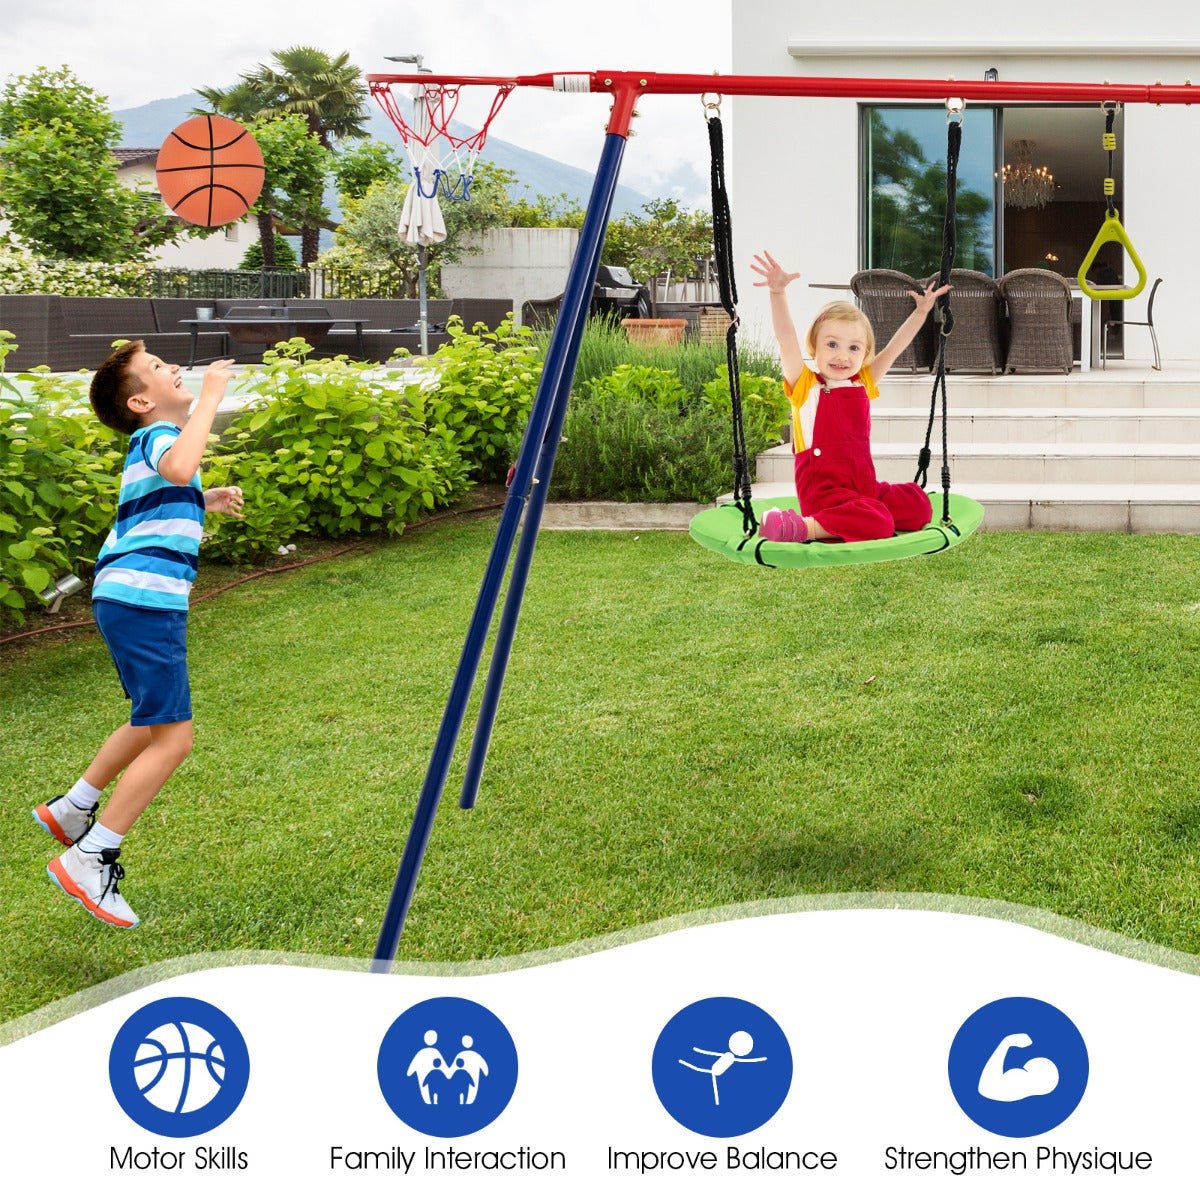 7-in-1 Swing Set with Ground Stakes: Unleash the Joy of Play